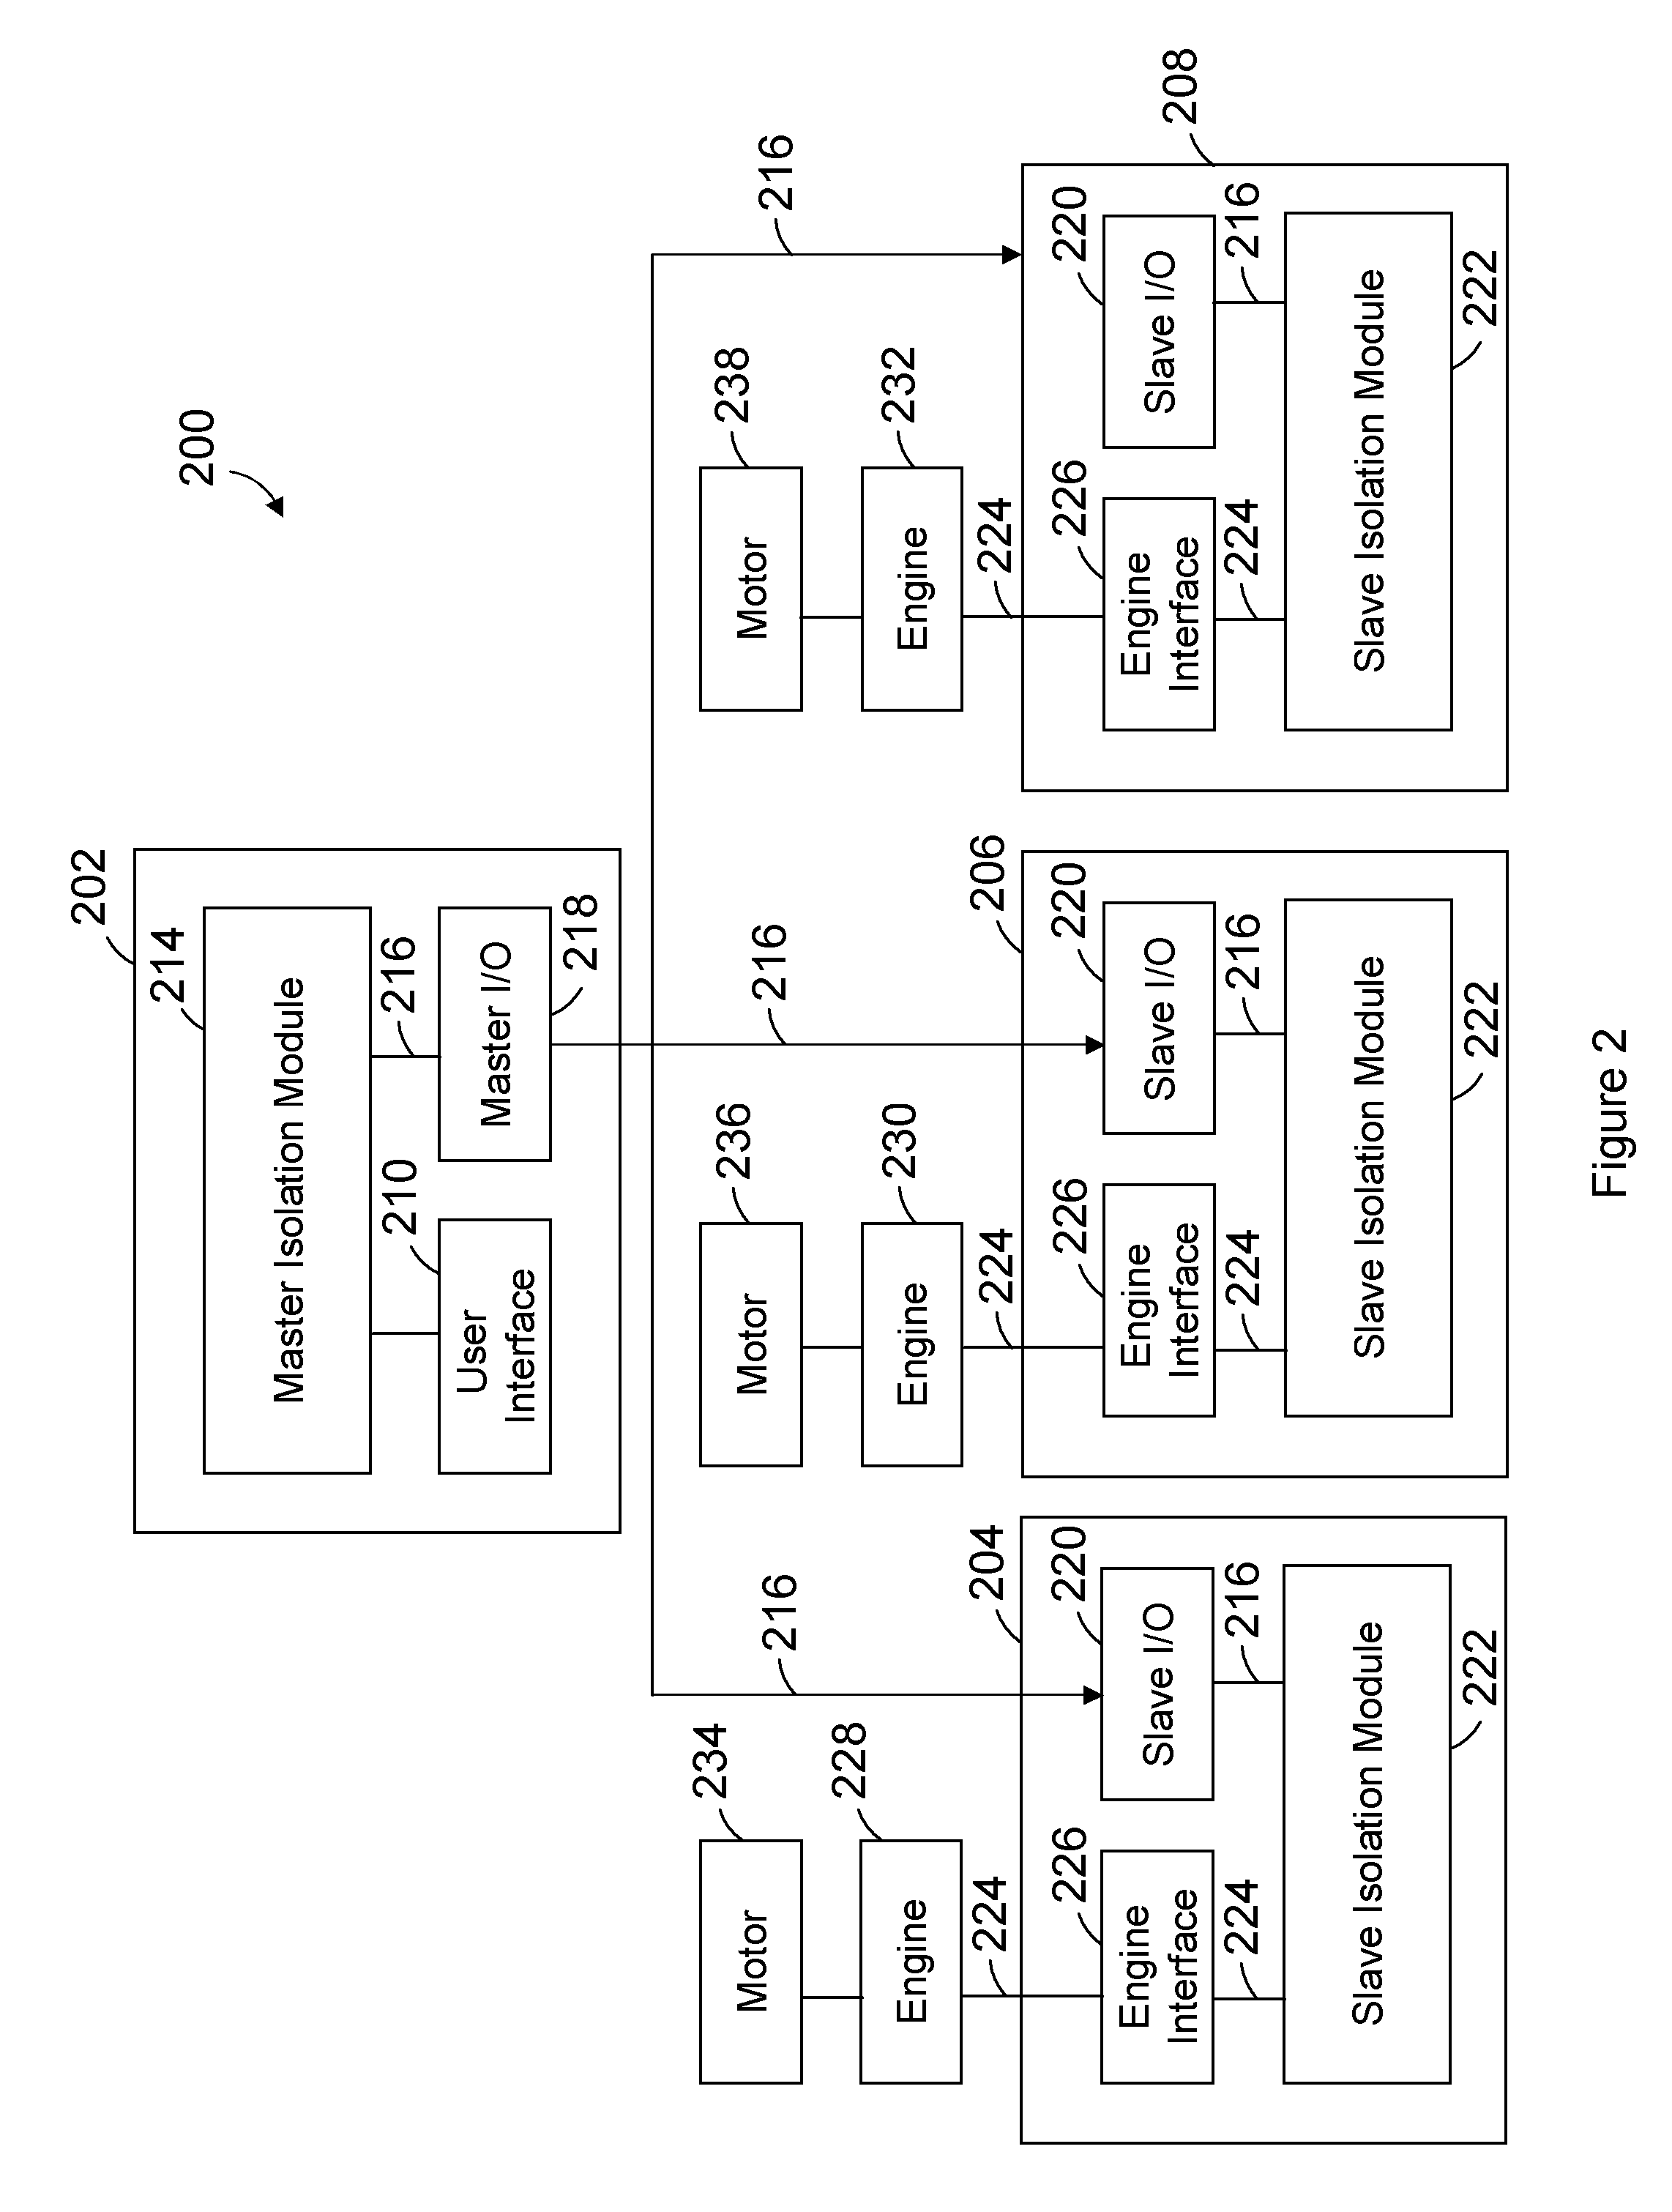 Control system and method for remotely isolating powered units in a rail vehicle system